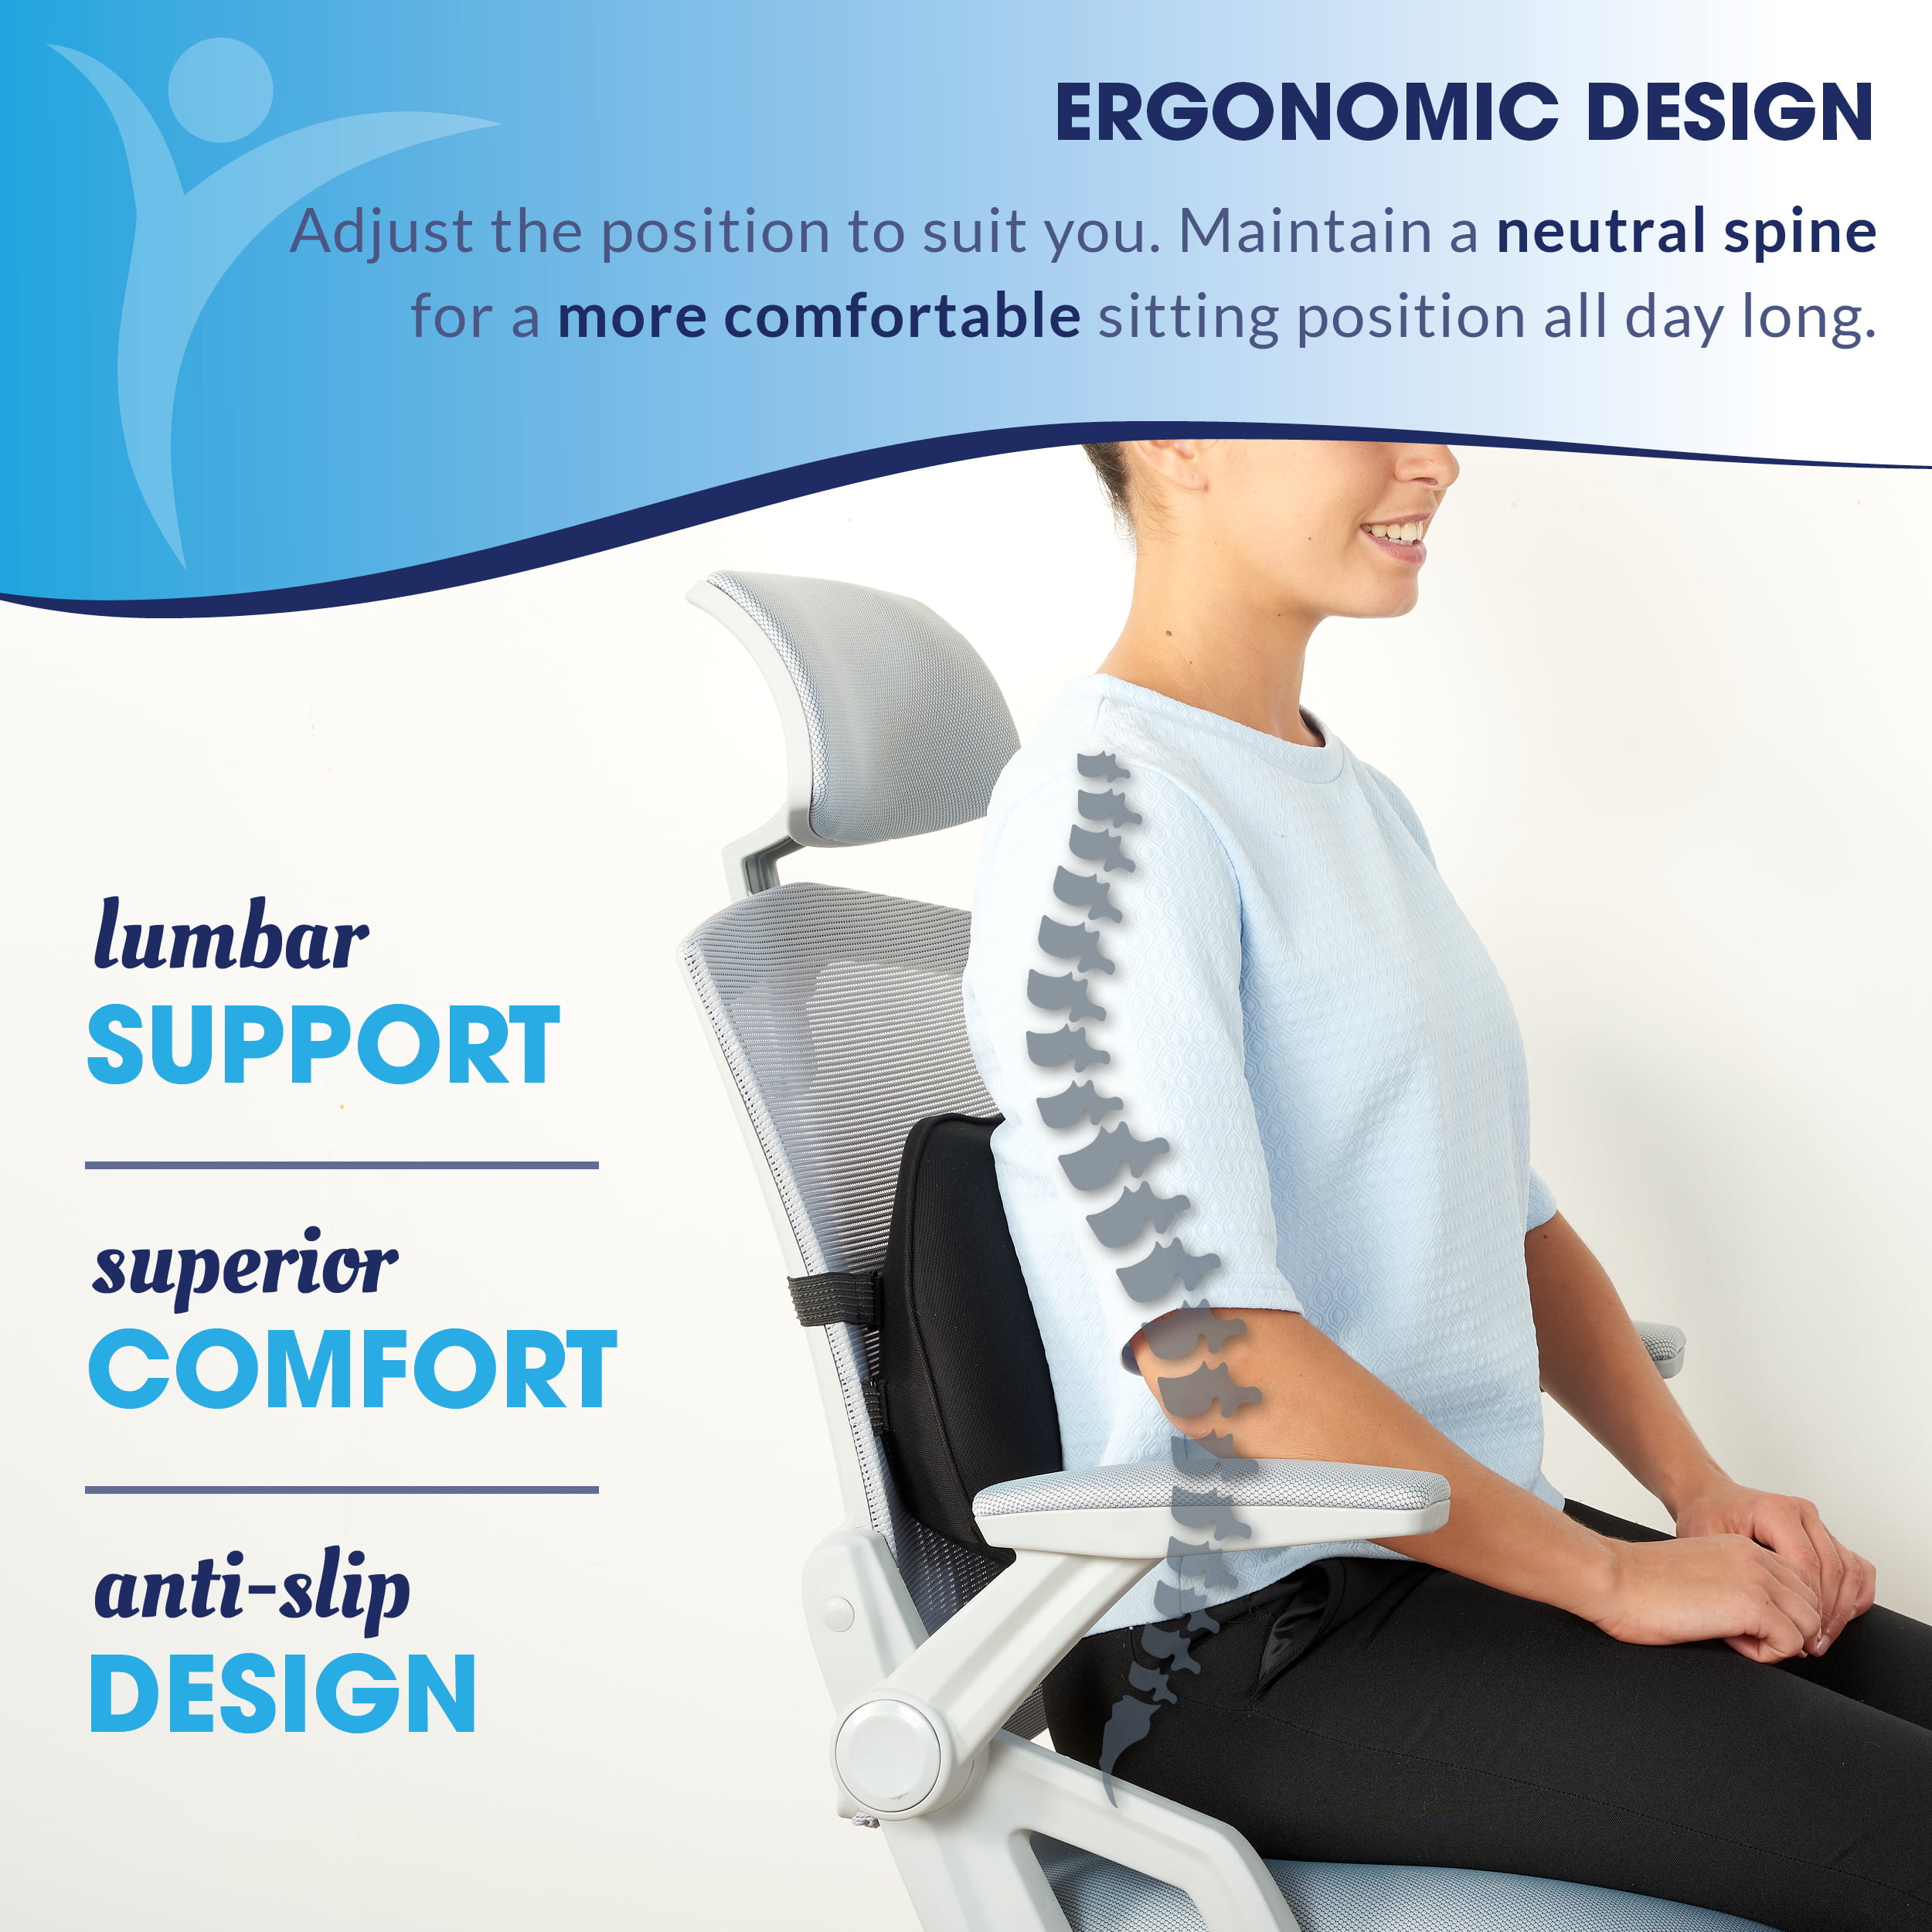 Relax Support RS1 Lumbar Support Pillow - Office Chair Back Support - Chair Cushion for Back Pain Uses ArcContour Special Patented Technology Has